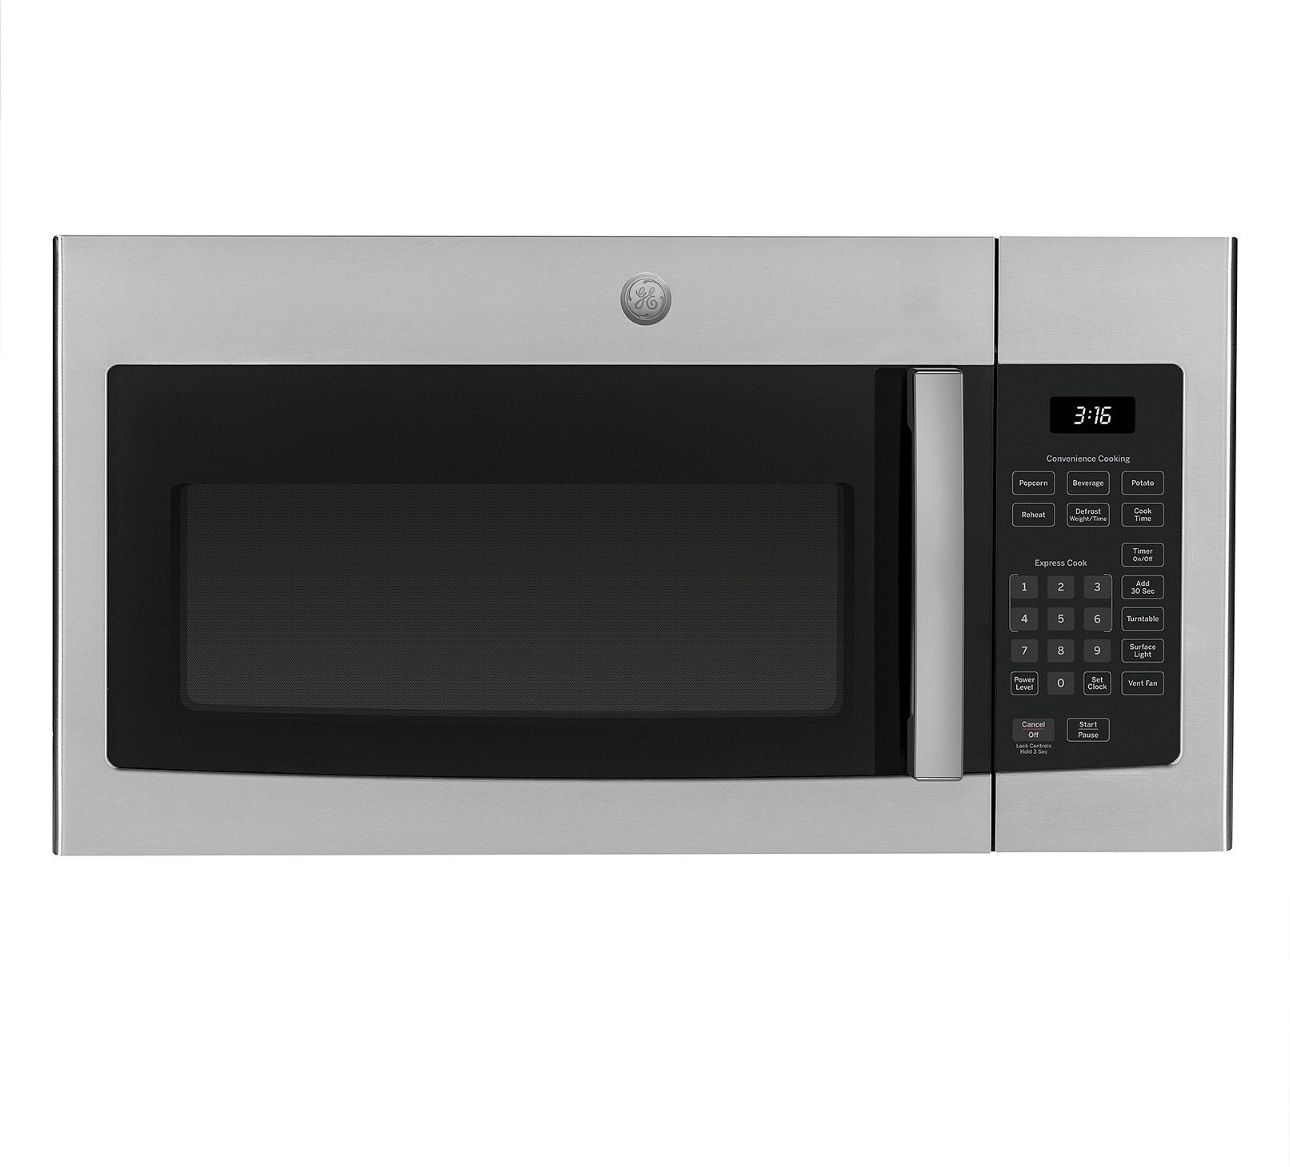 GE Microwave Oven Over the Range, 1.6 Cu Ft in Stainless Steel